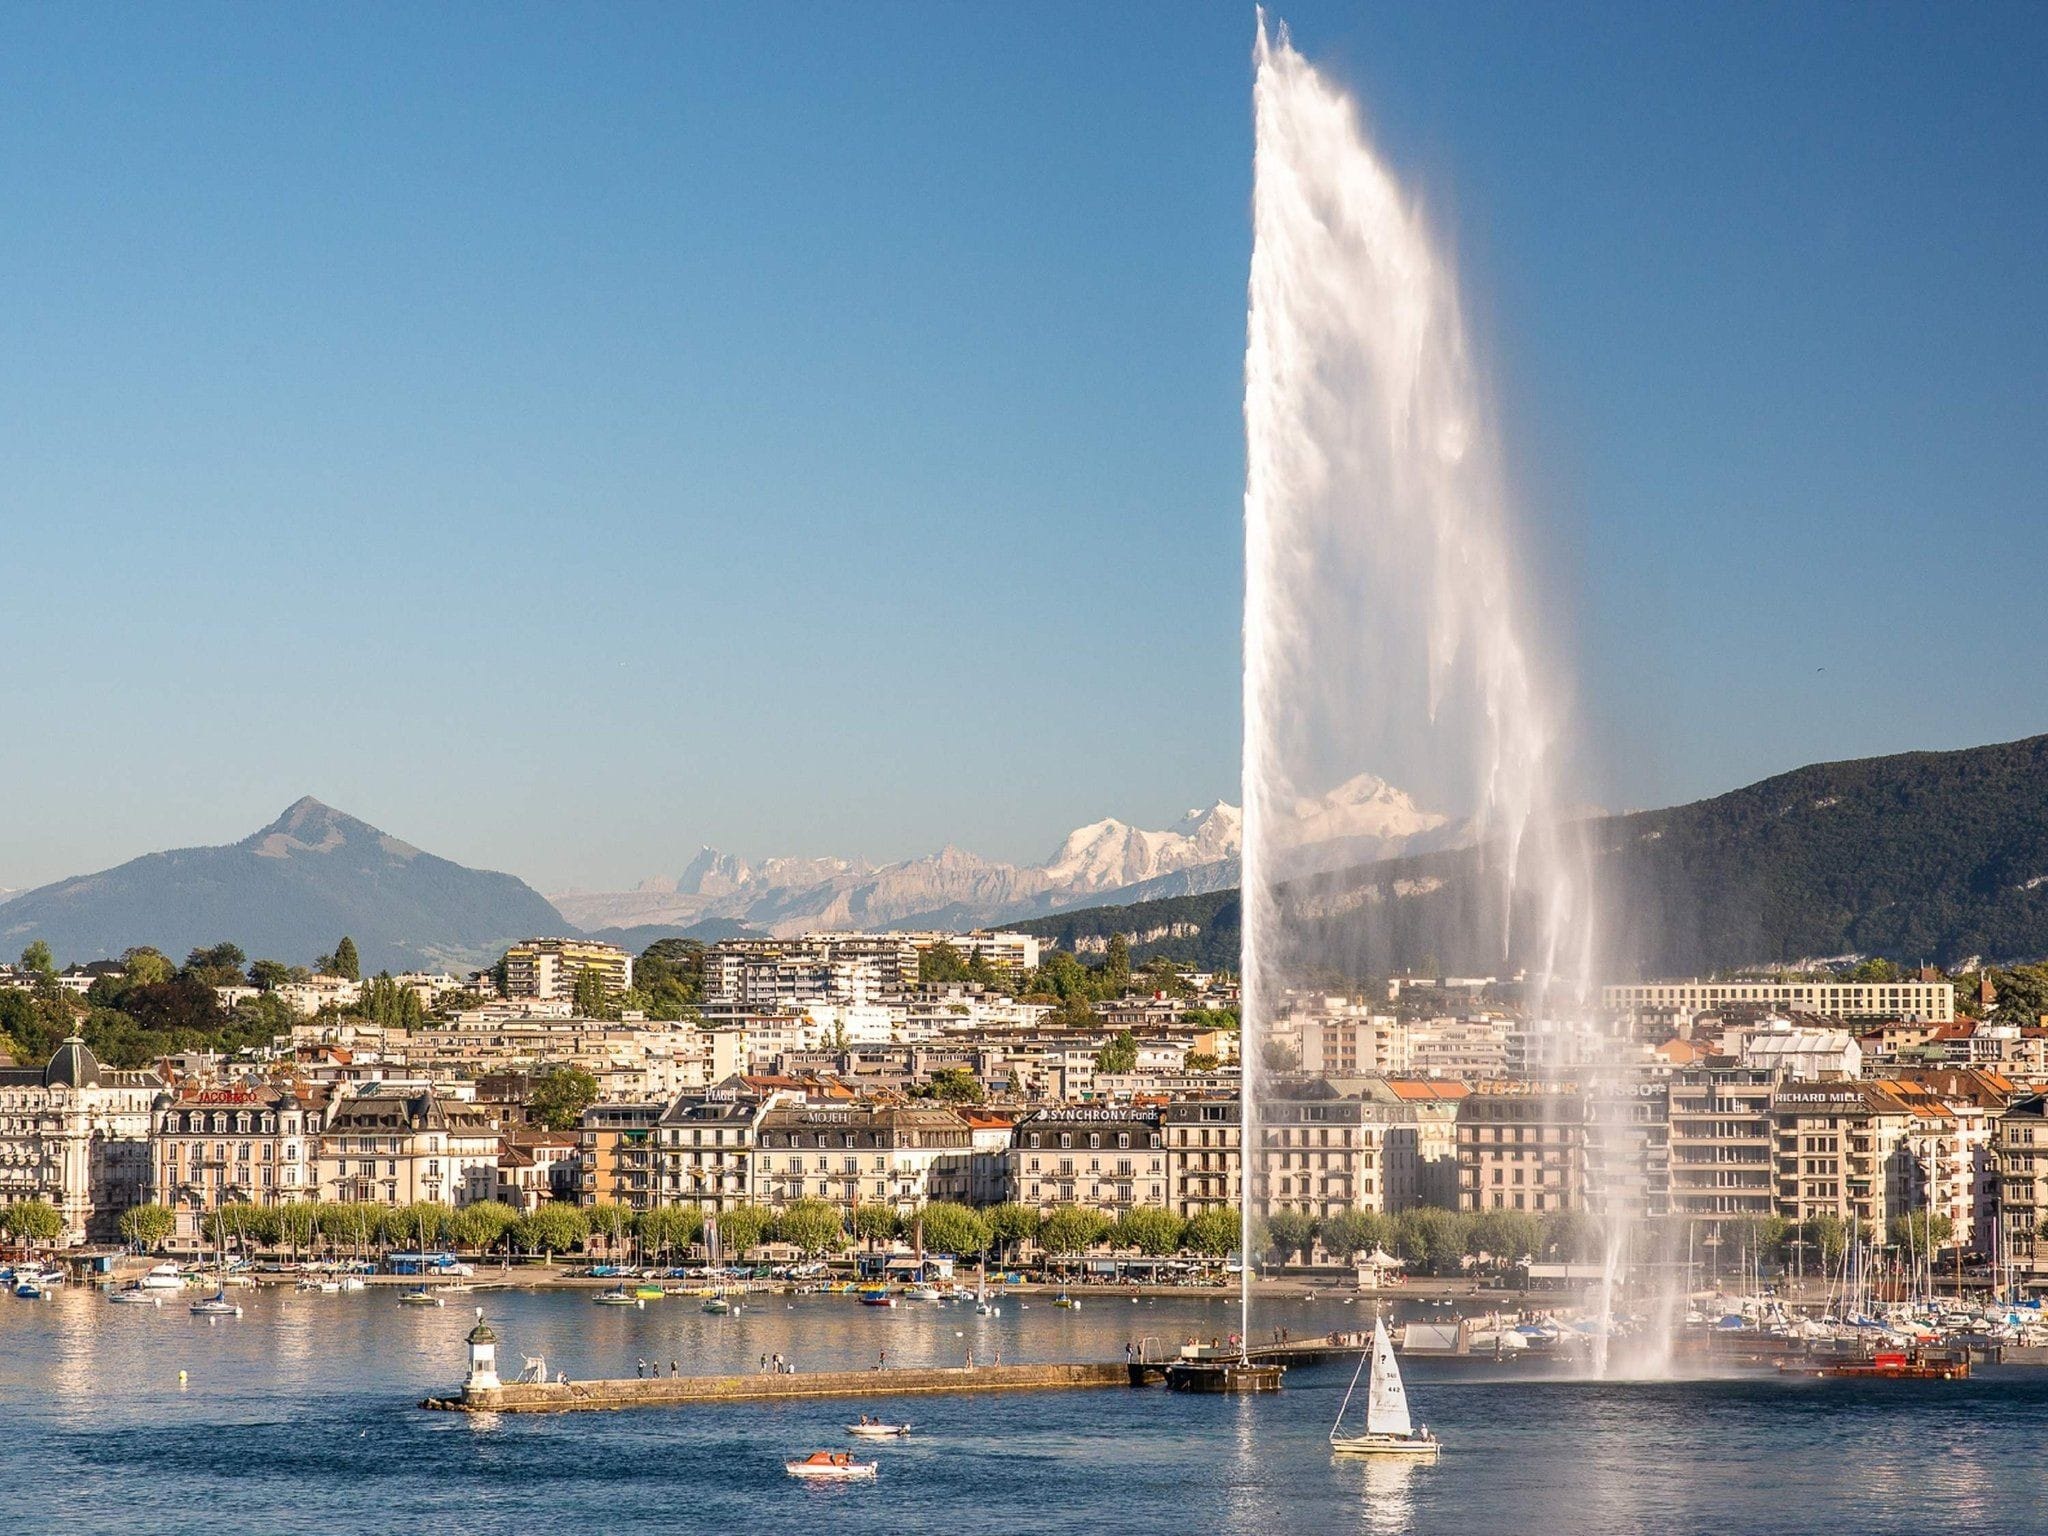 Large water fountain with buildings and boats in the background.